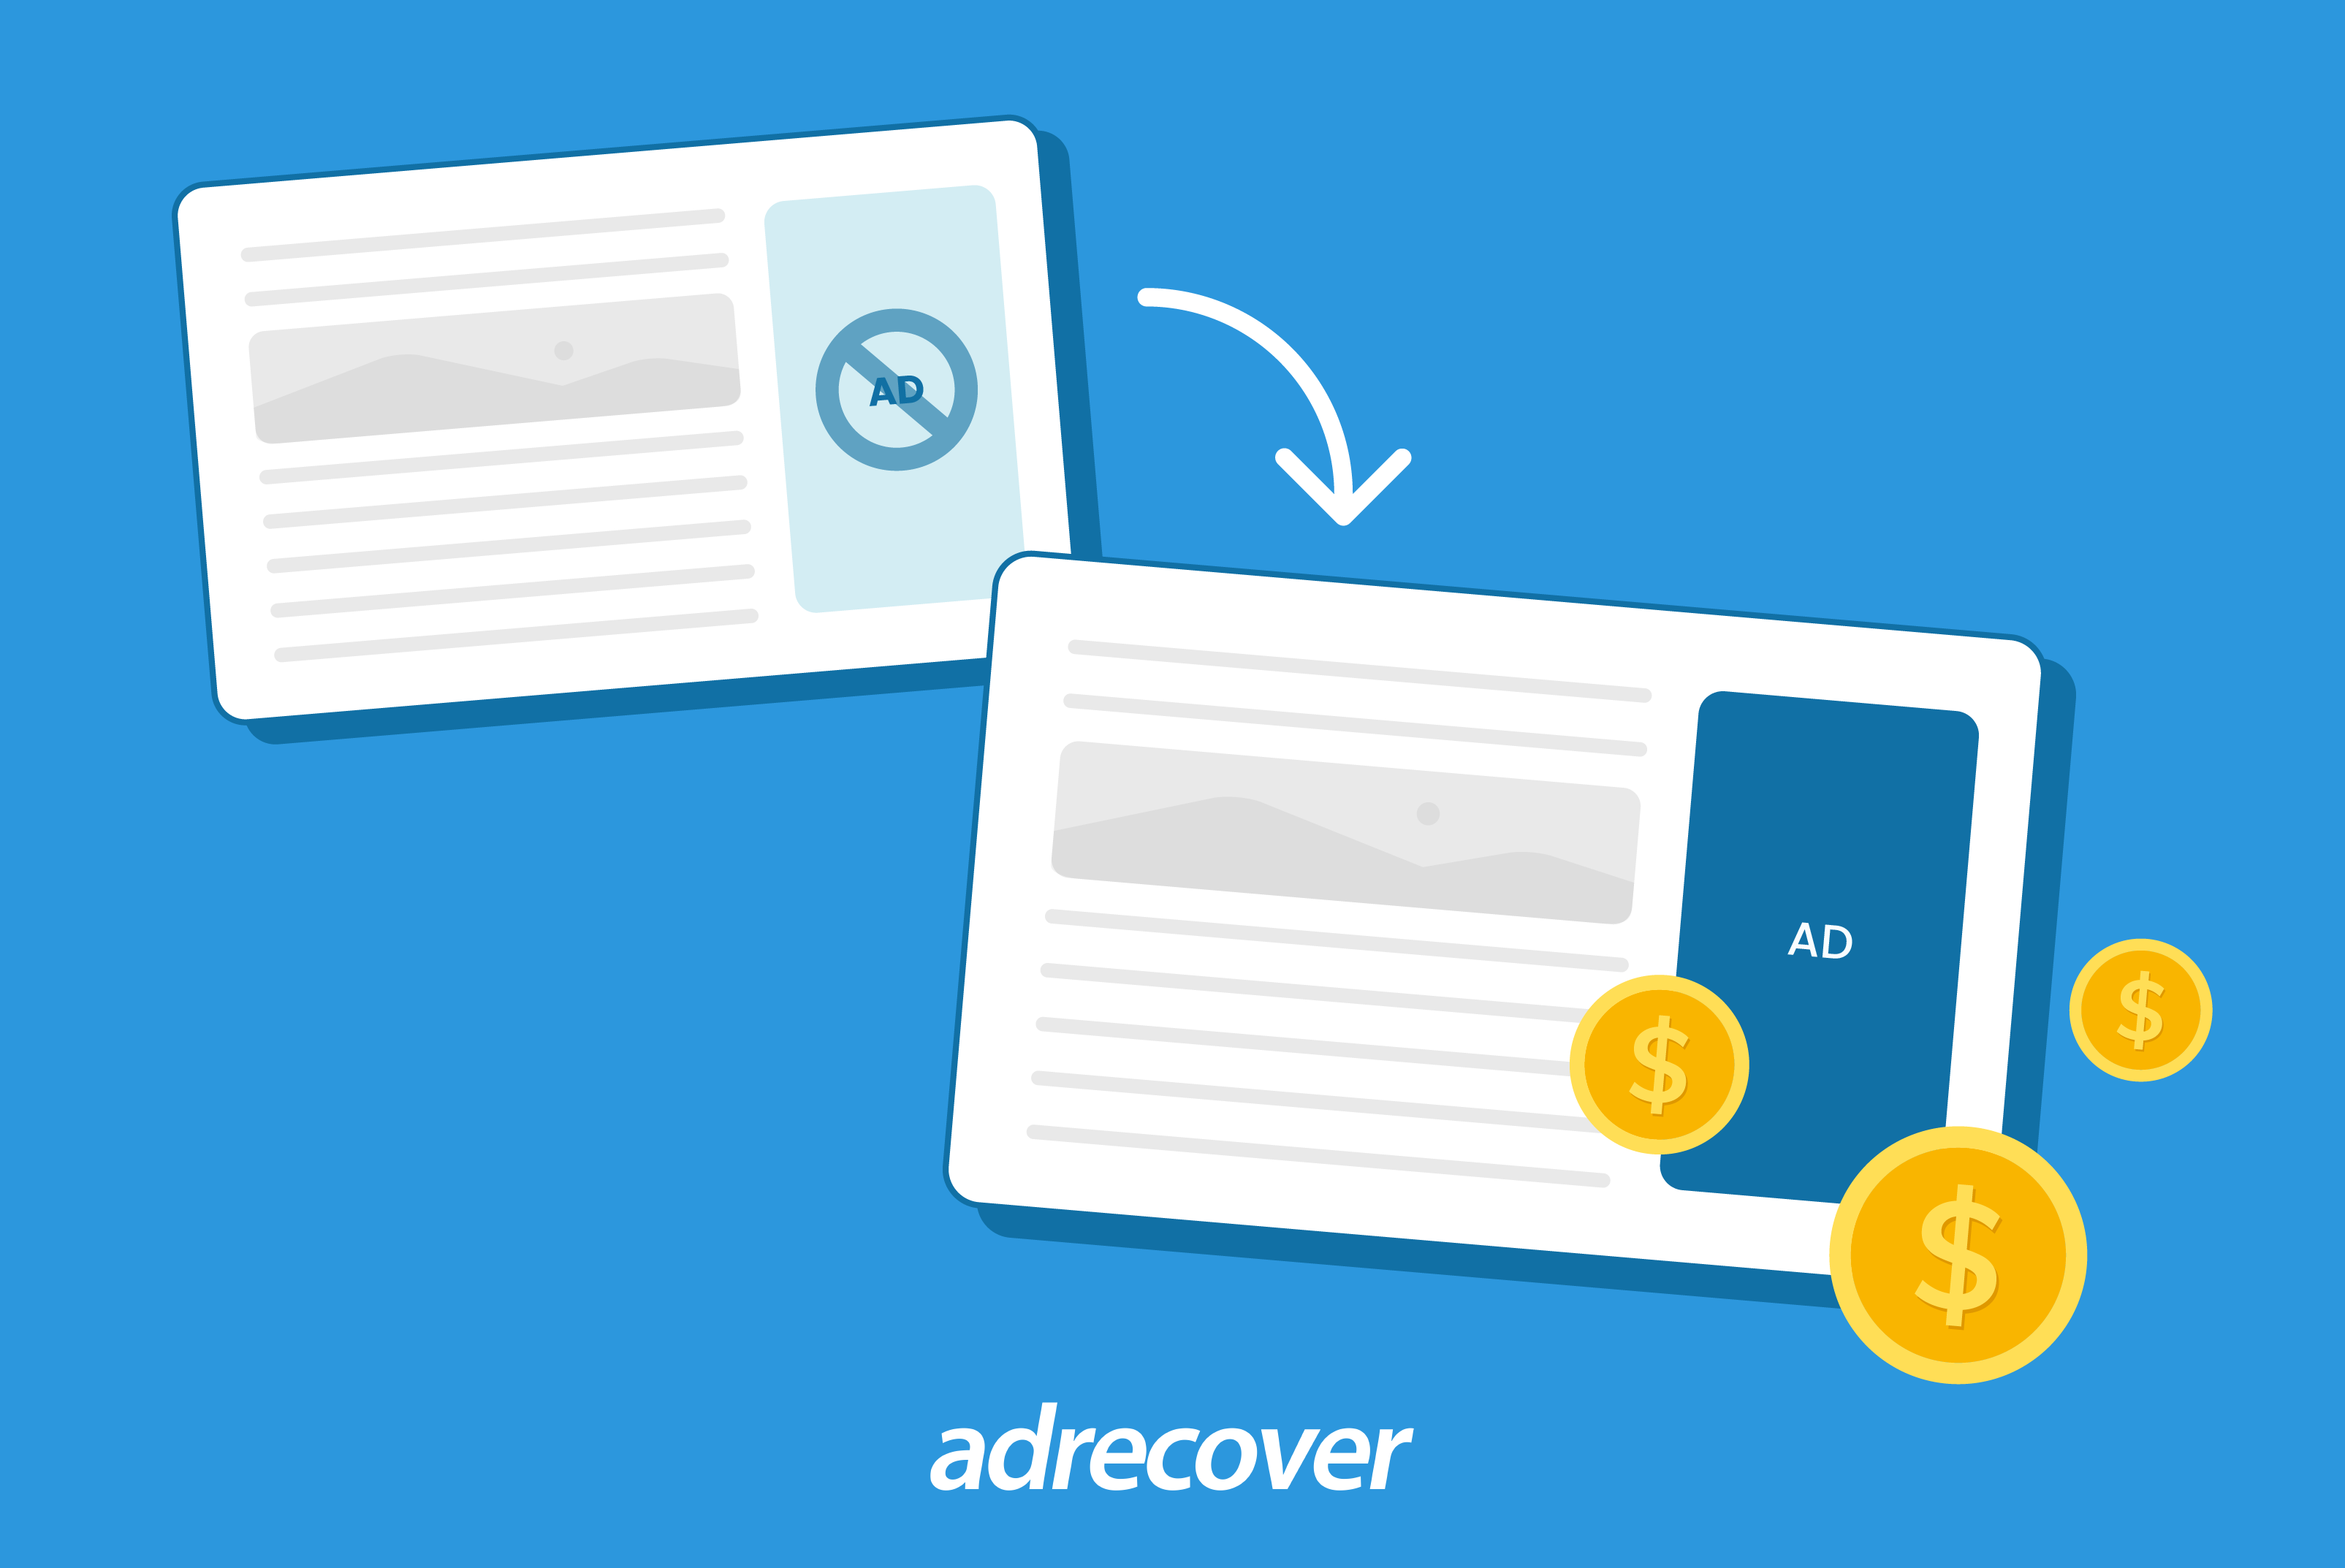 How to Monetize Adblock Traffic with Adrecover